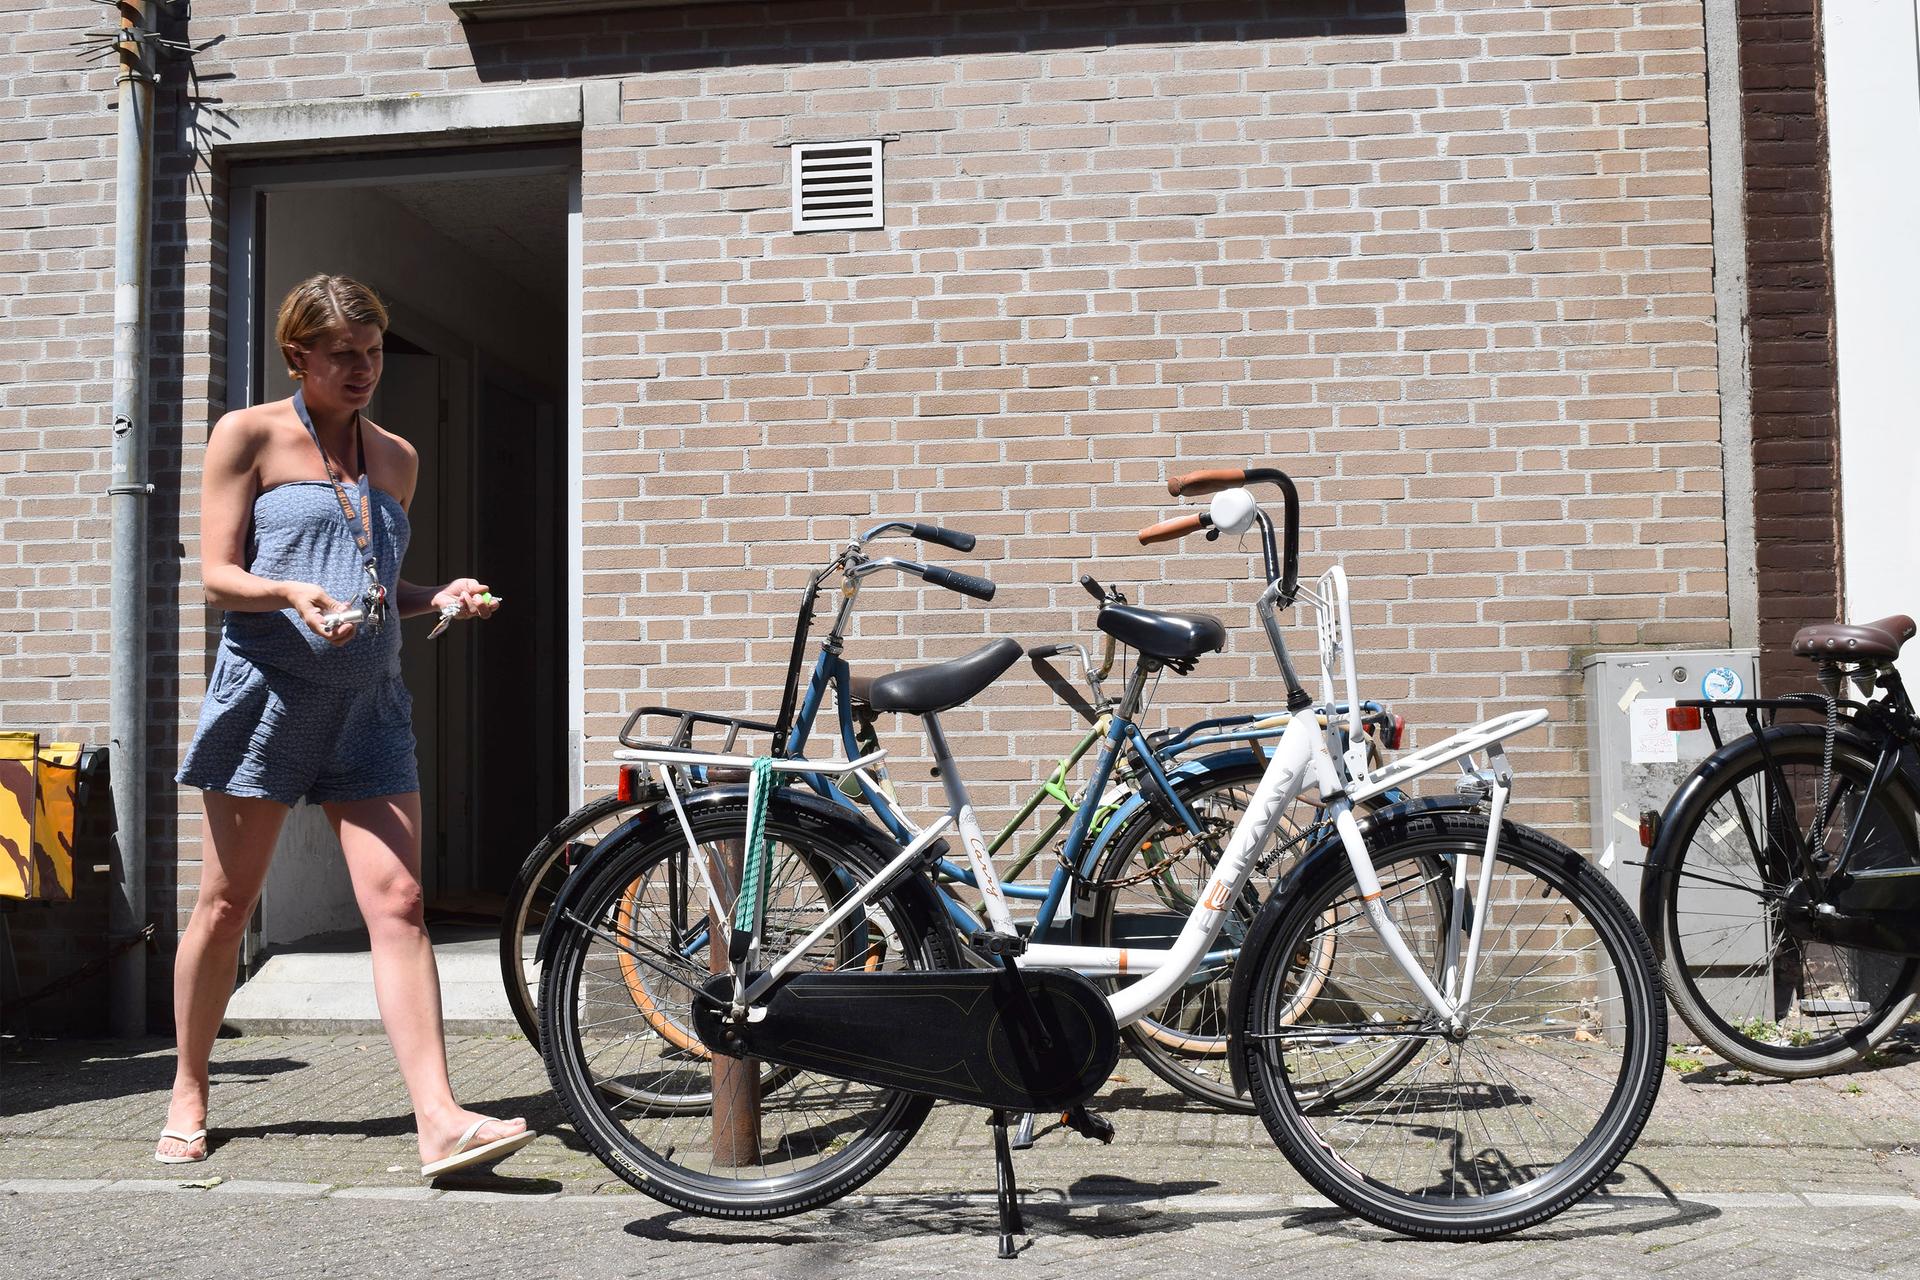 Amsterdam resident, Ine, rents out her unused bikes on Cycleswap.